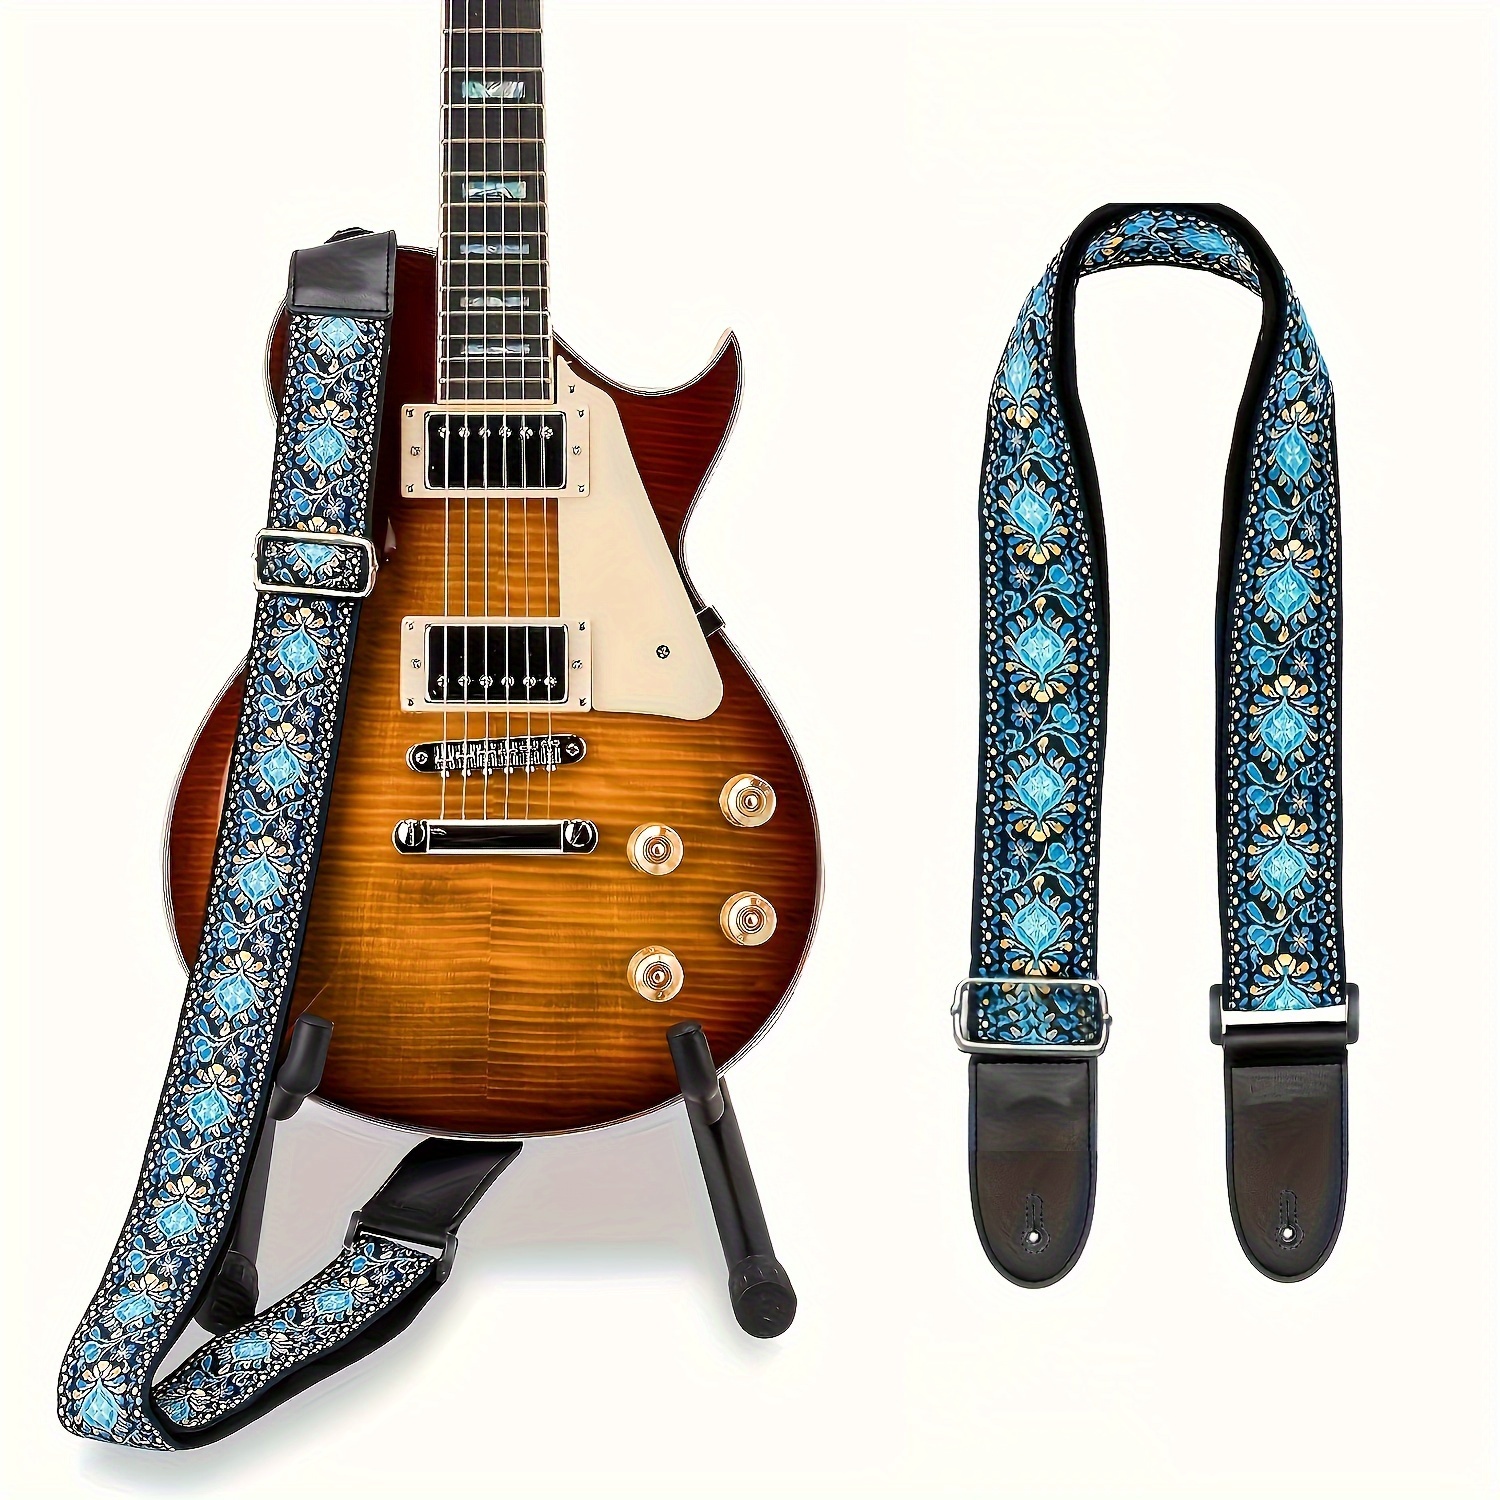 The EMPRESS Guitar Strap - Adjustable Guitar Strap for Acoustic, Electric  and Bass Guitar